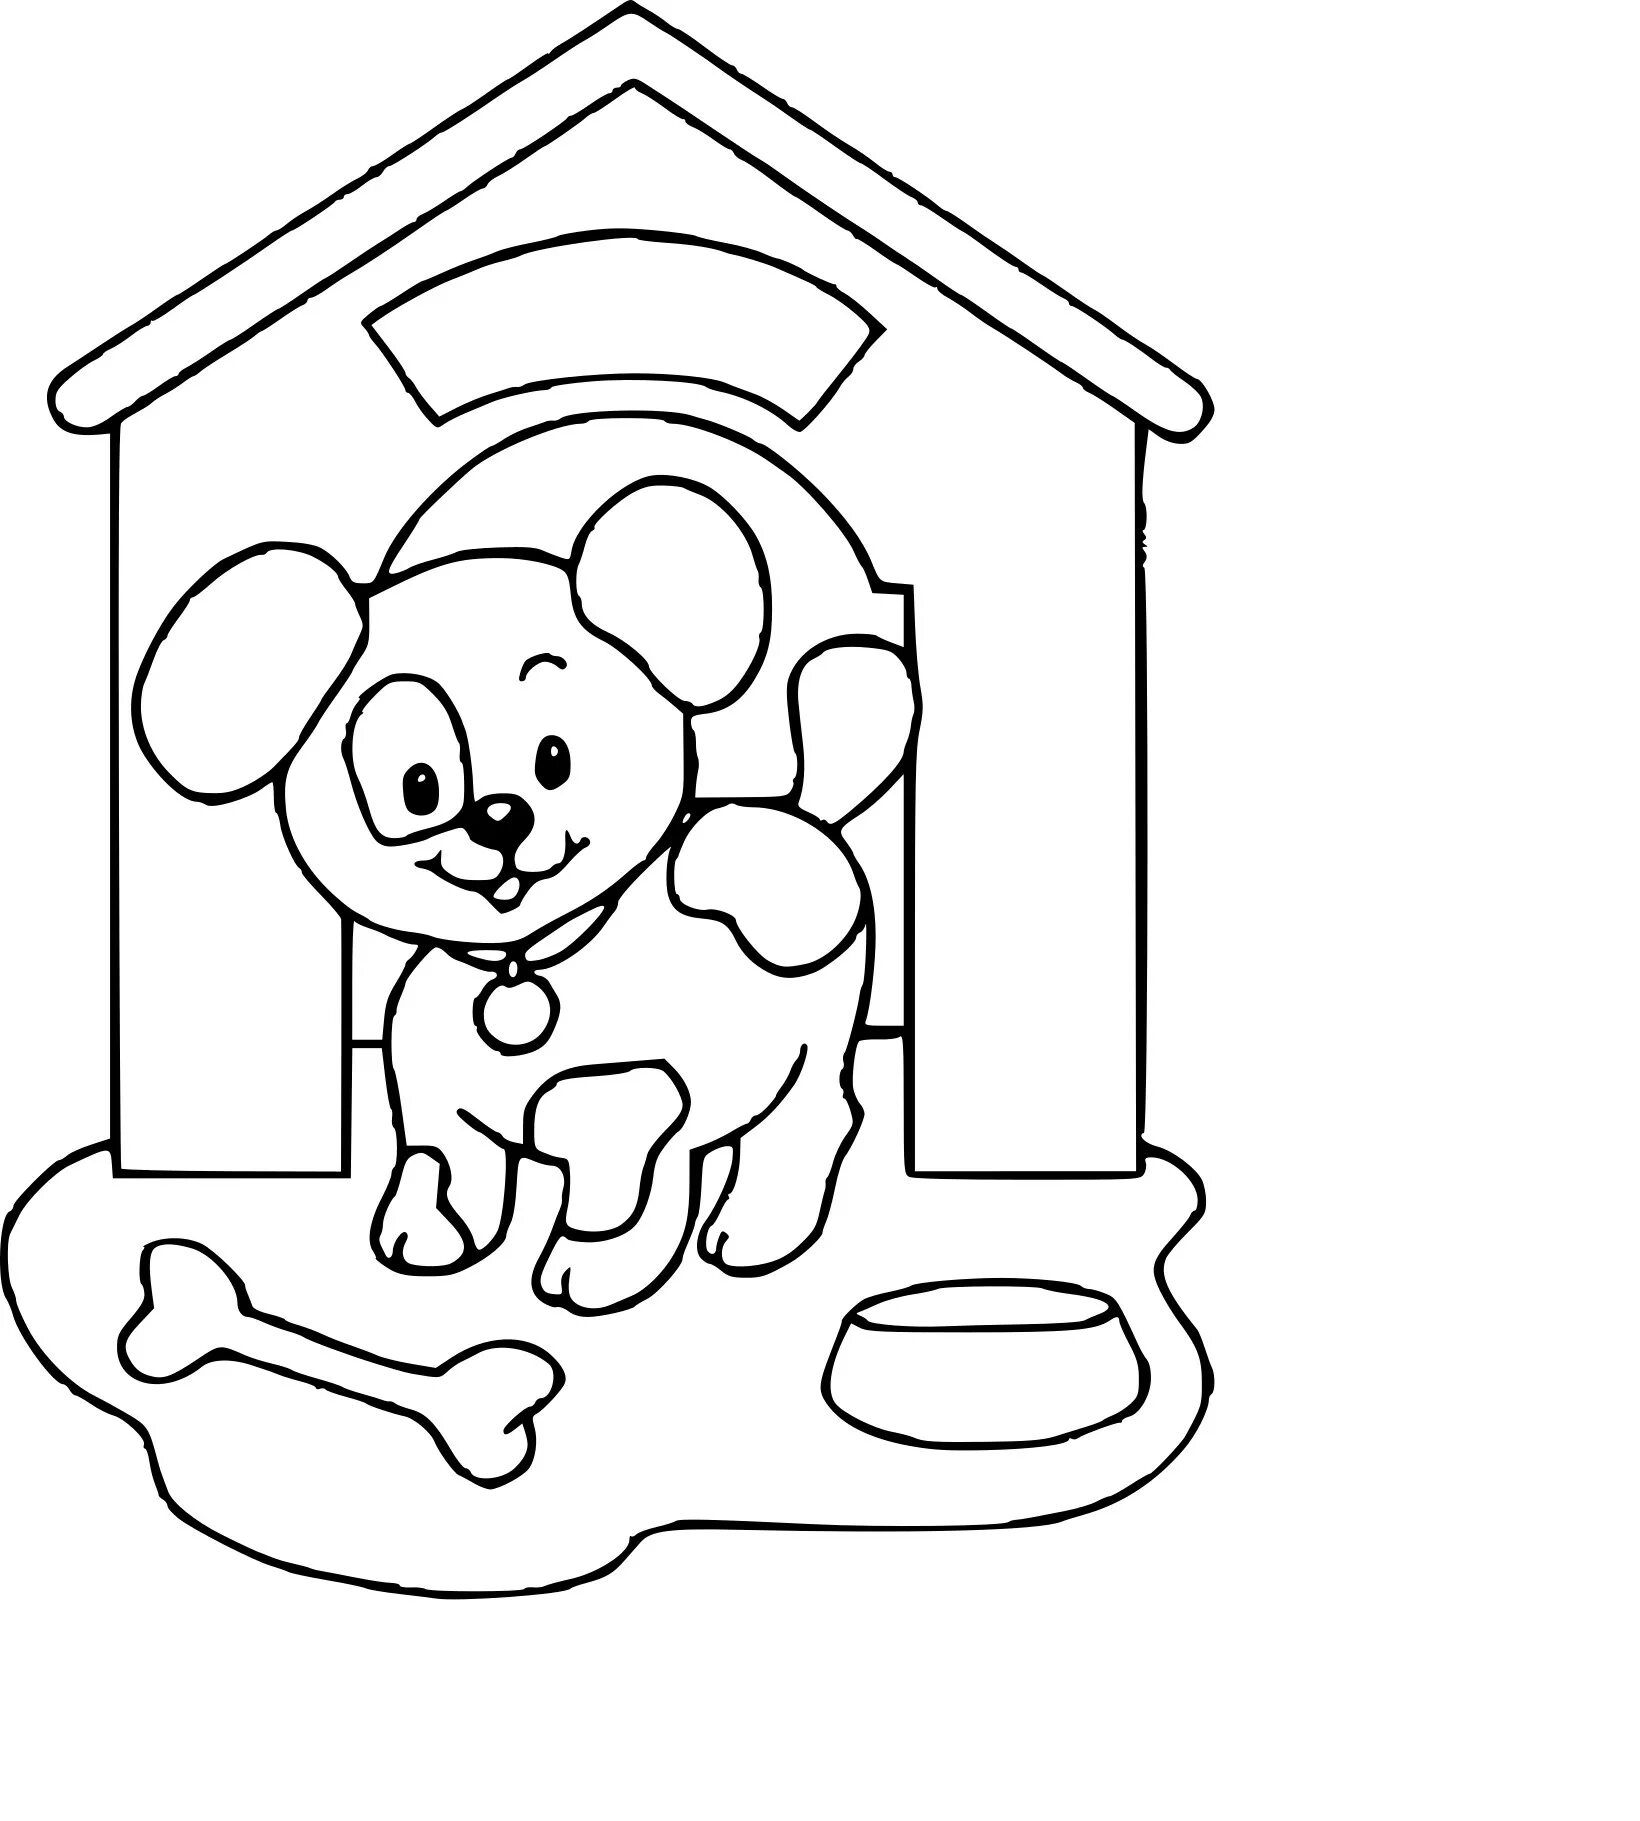 Invigorating dog house coloring page